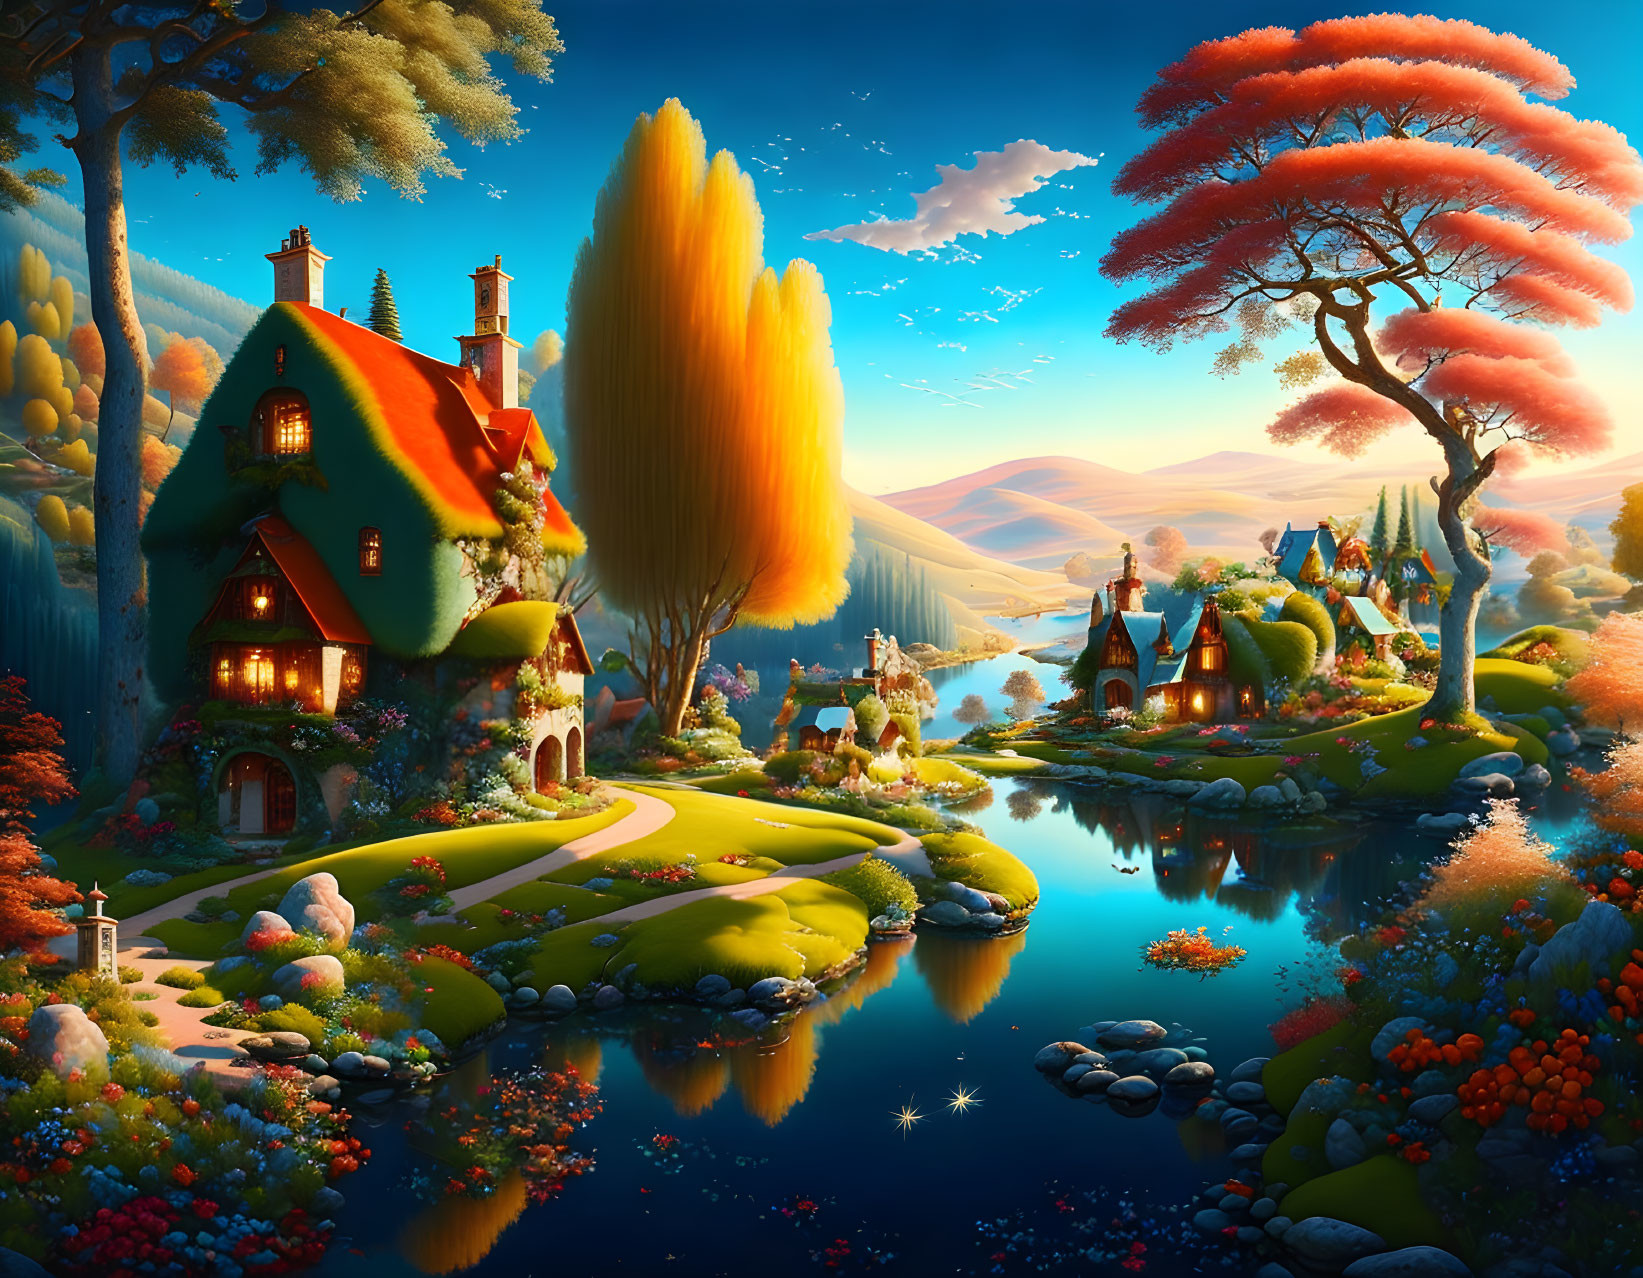 Colorful Fantasy Landscape with Whimsical Cottages and Tranquil Pond